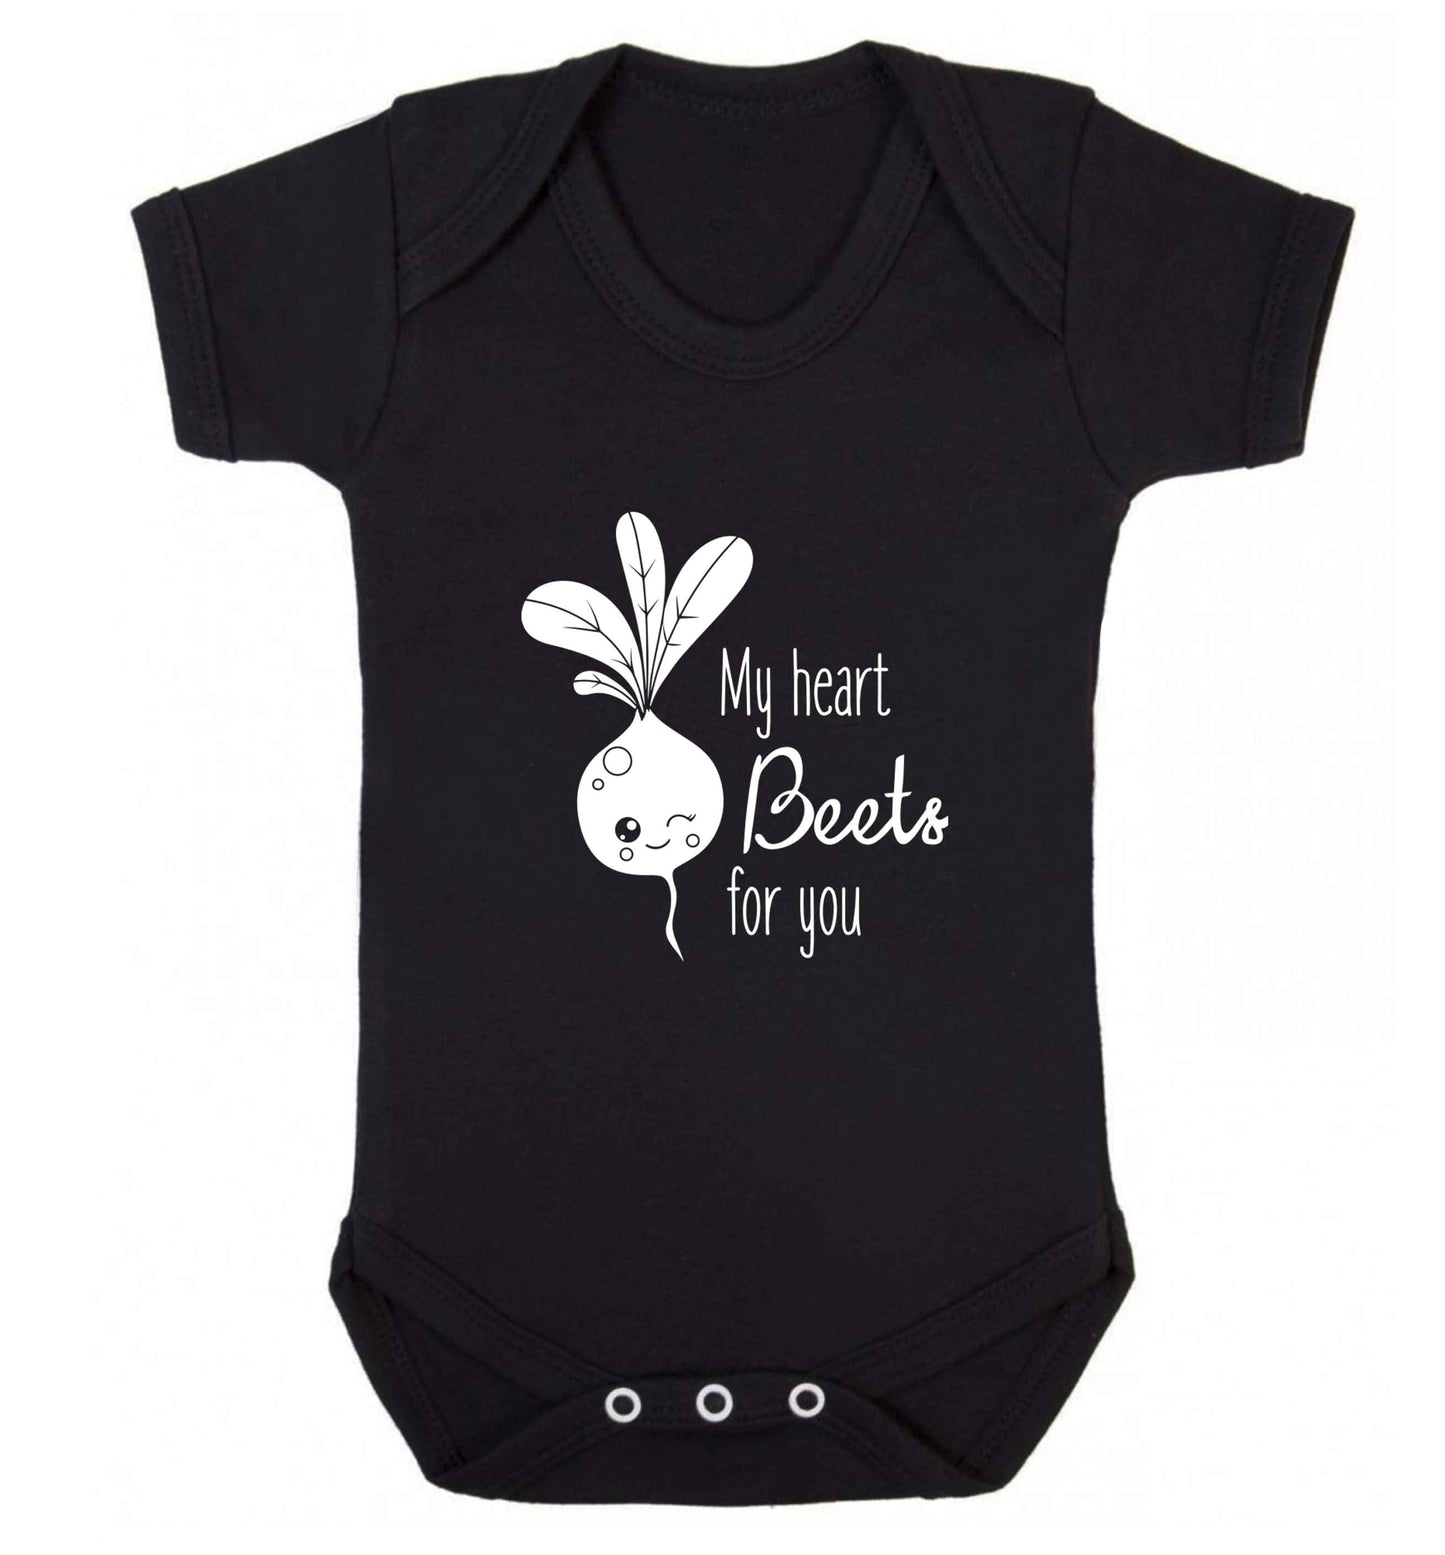 My heart beets for you baby vest black 18-24 months